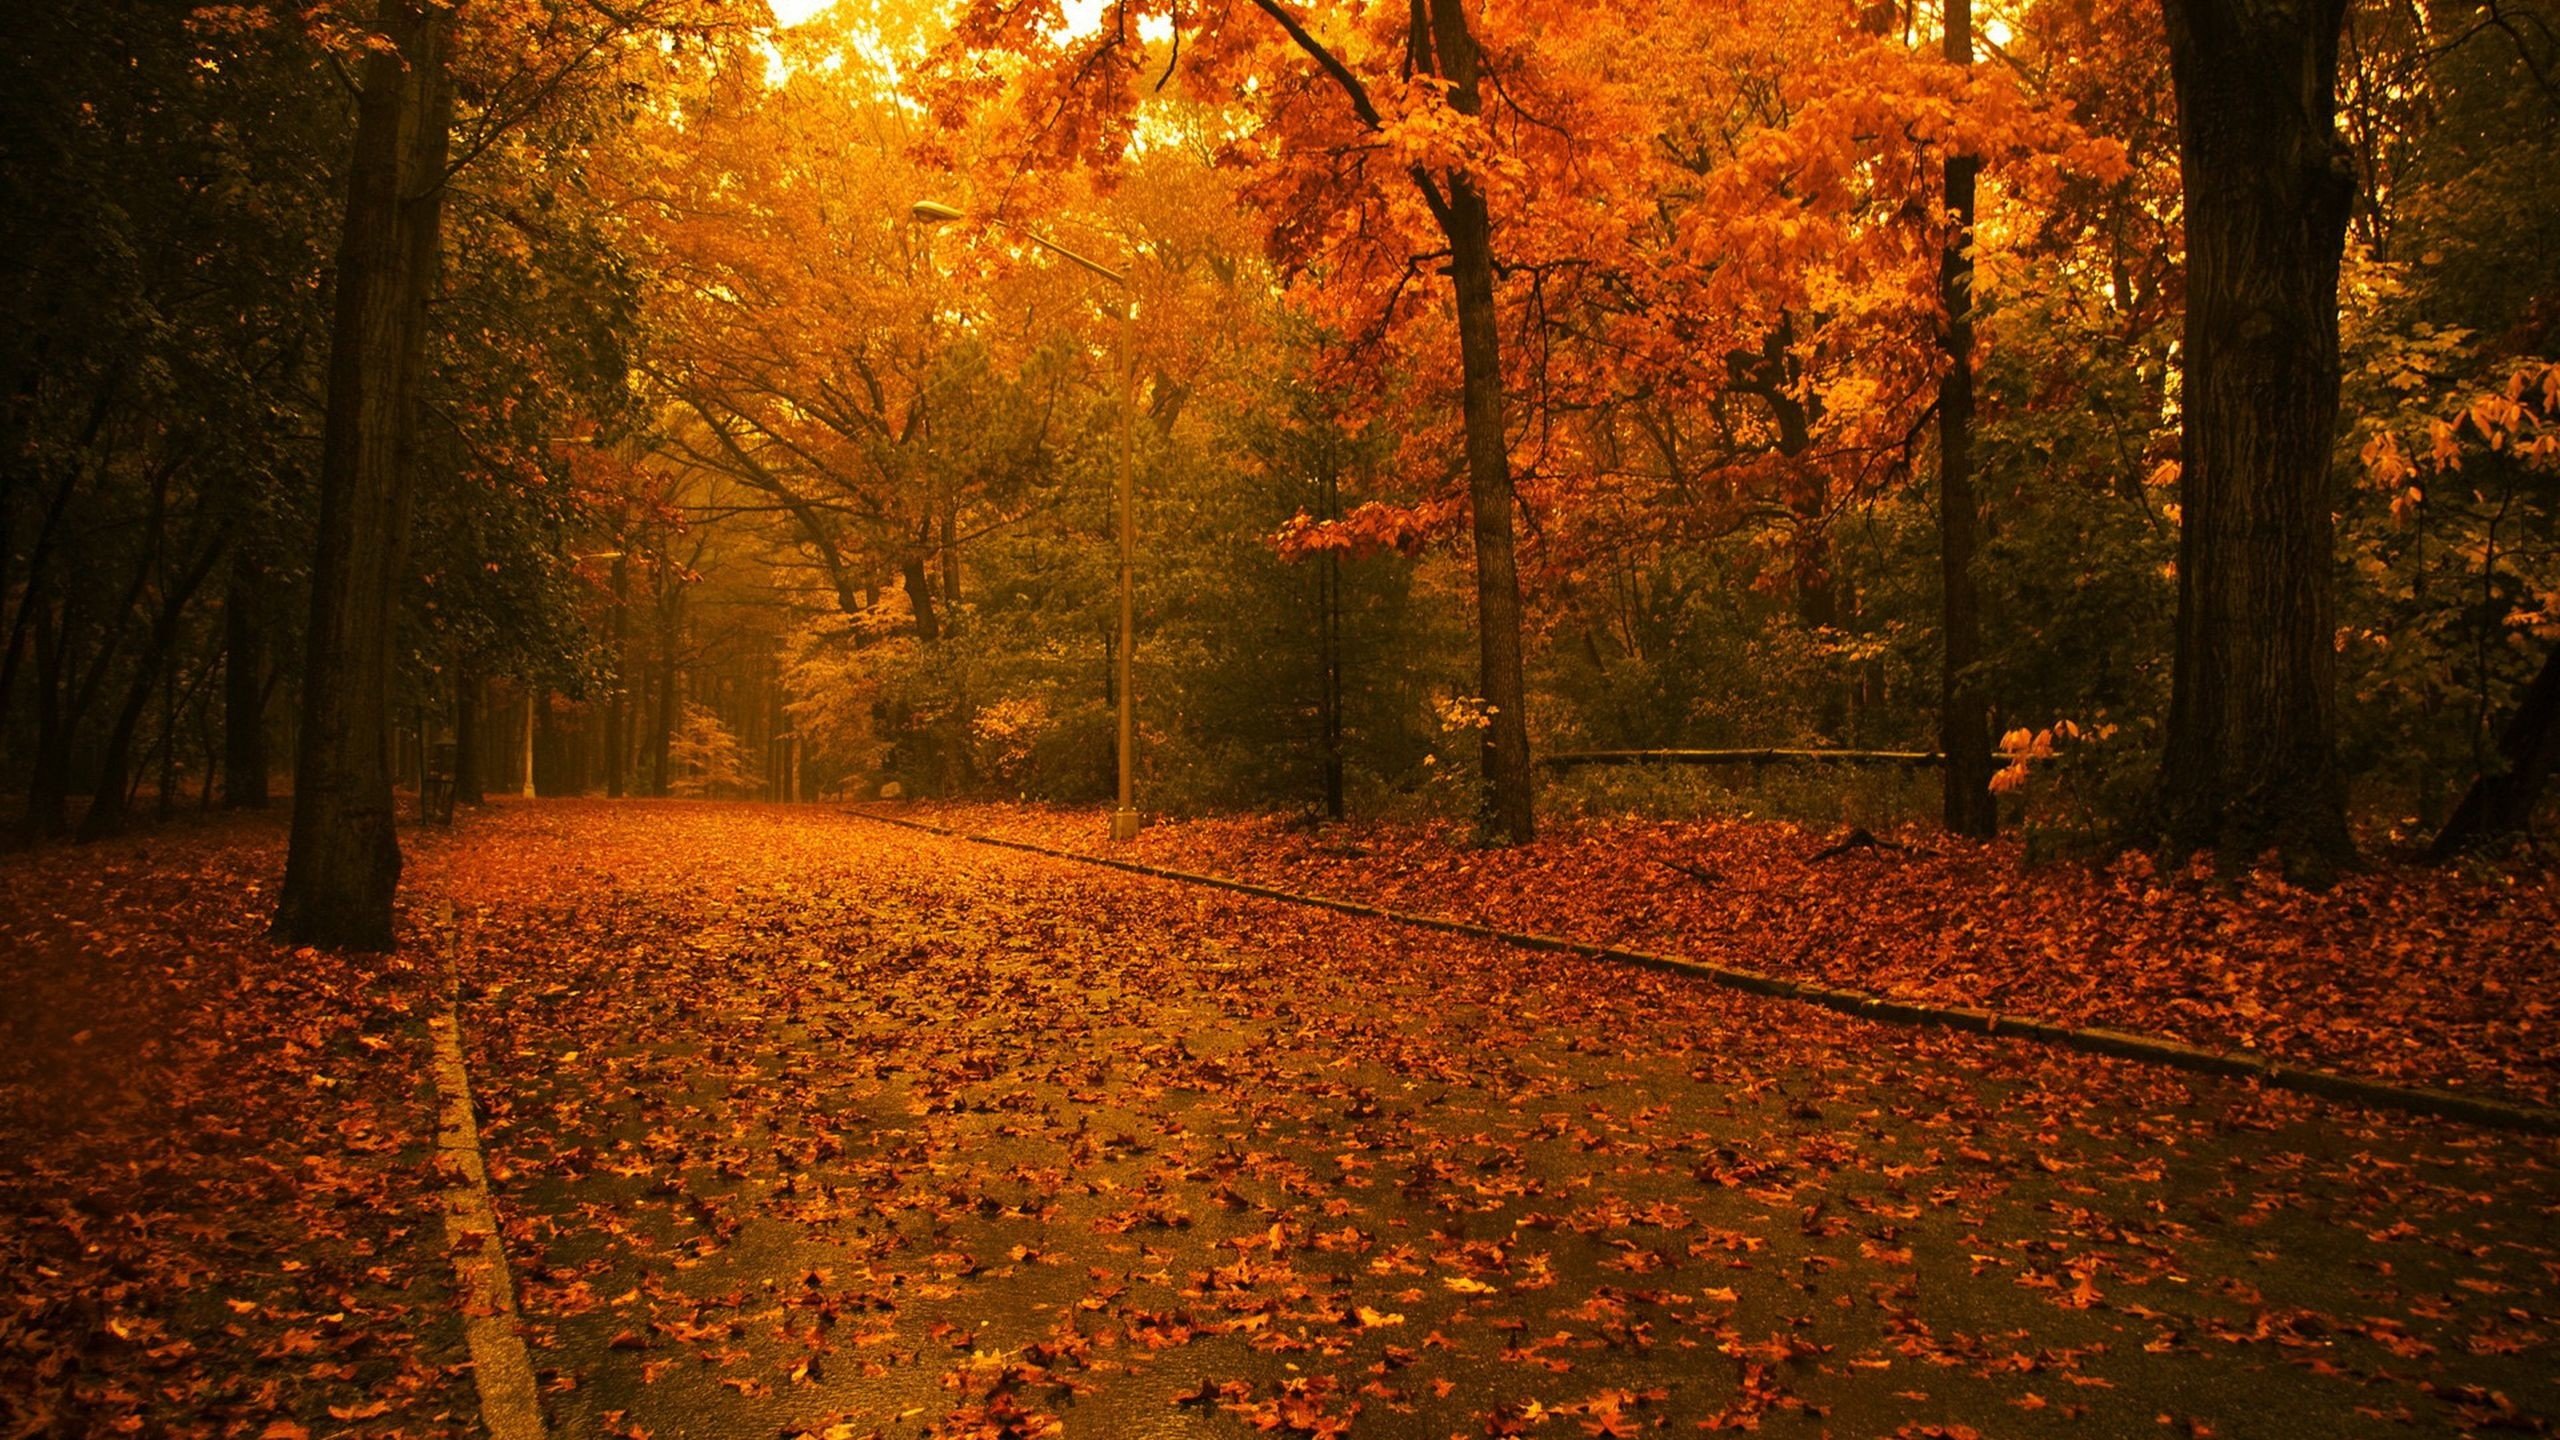 landscapes, Nature, Trees, Autumn, Forests, Fallen, Leaves Wallpaper